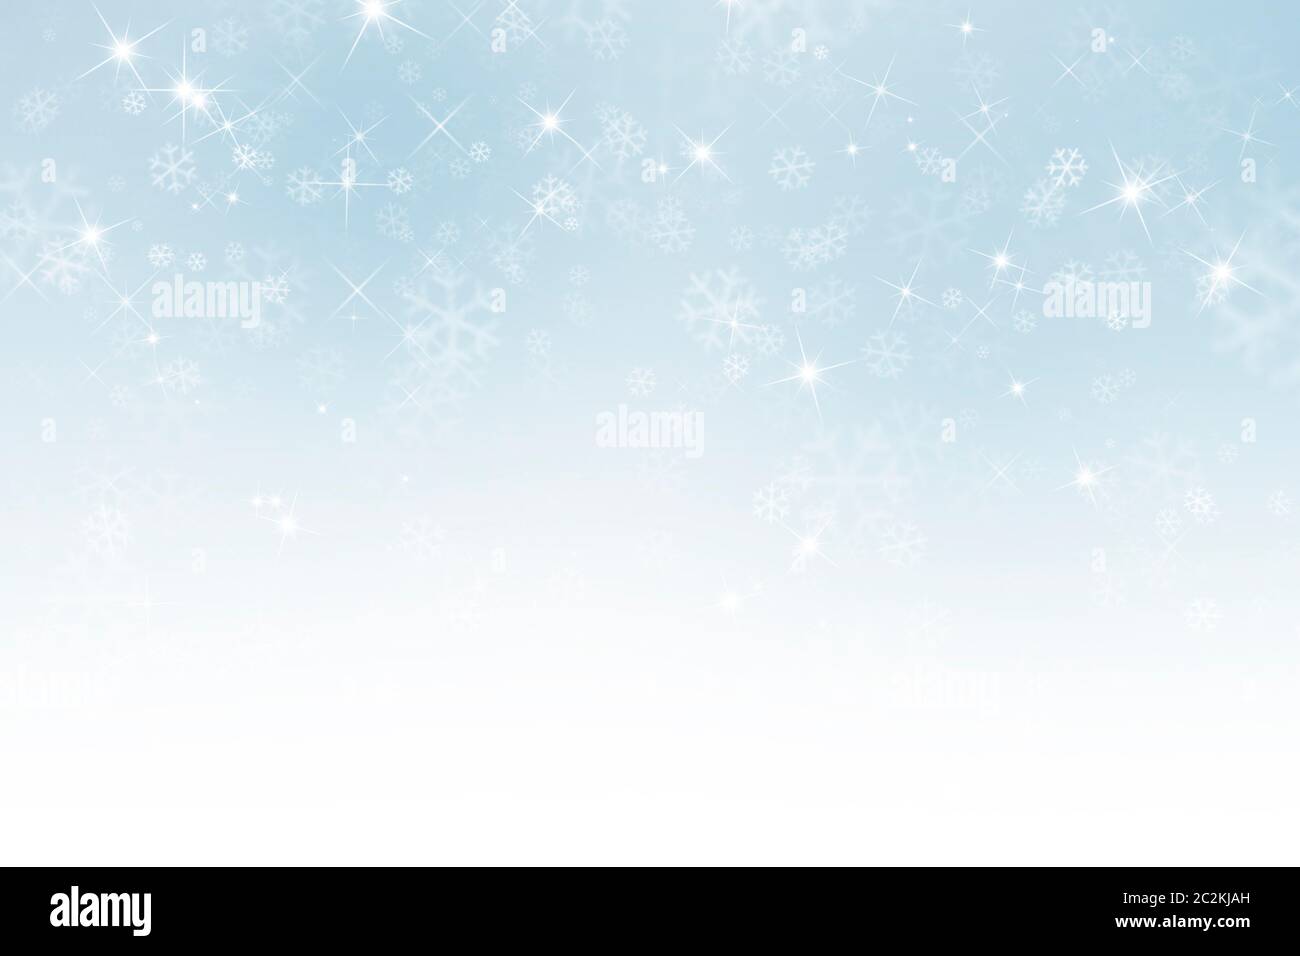 abstract winter sky background with snowflakes Stock Photo